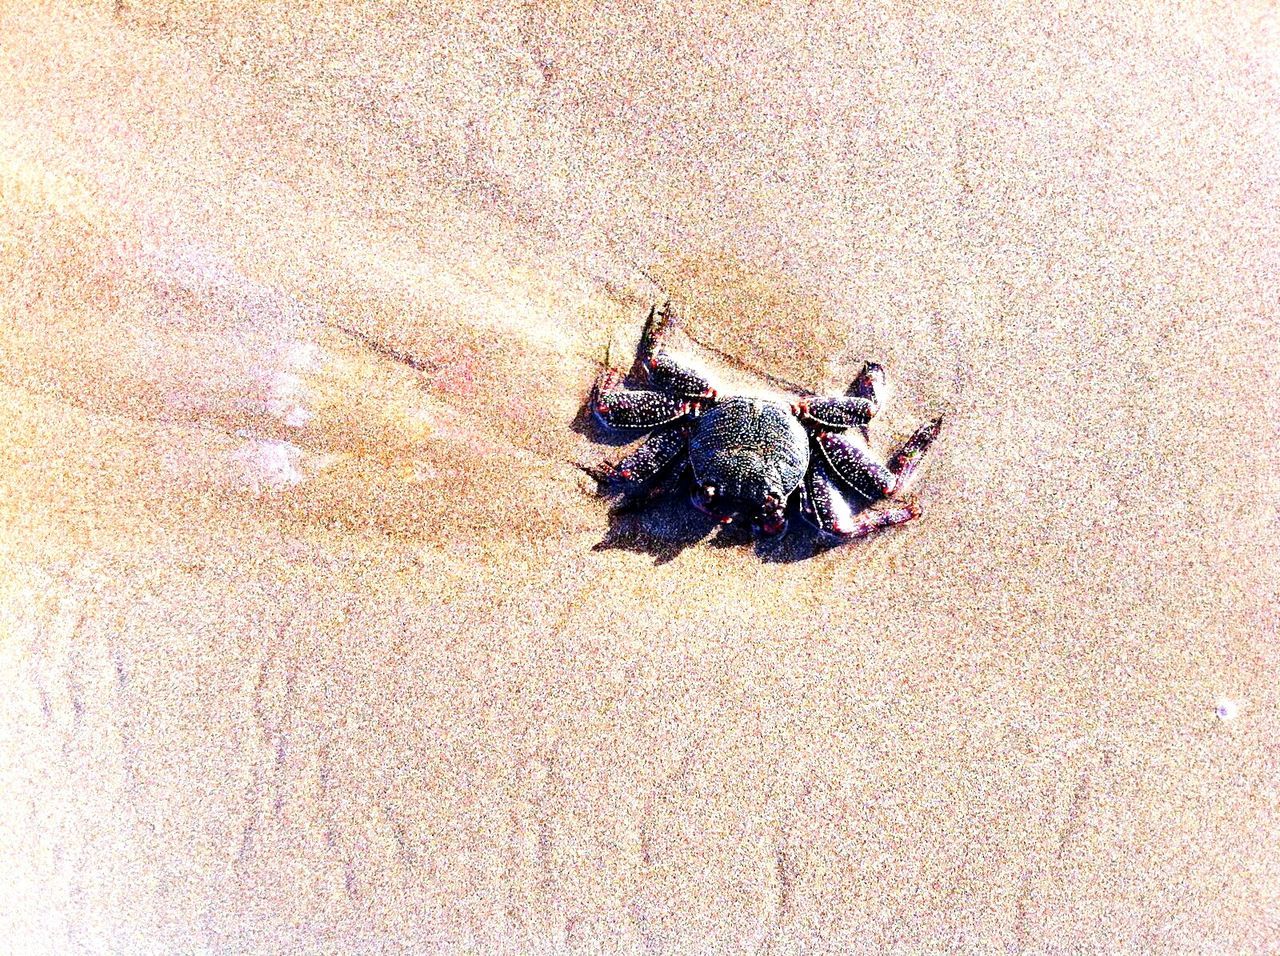 High angle view of crab at sandy beach